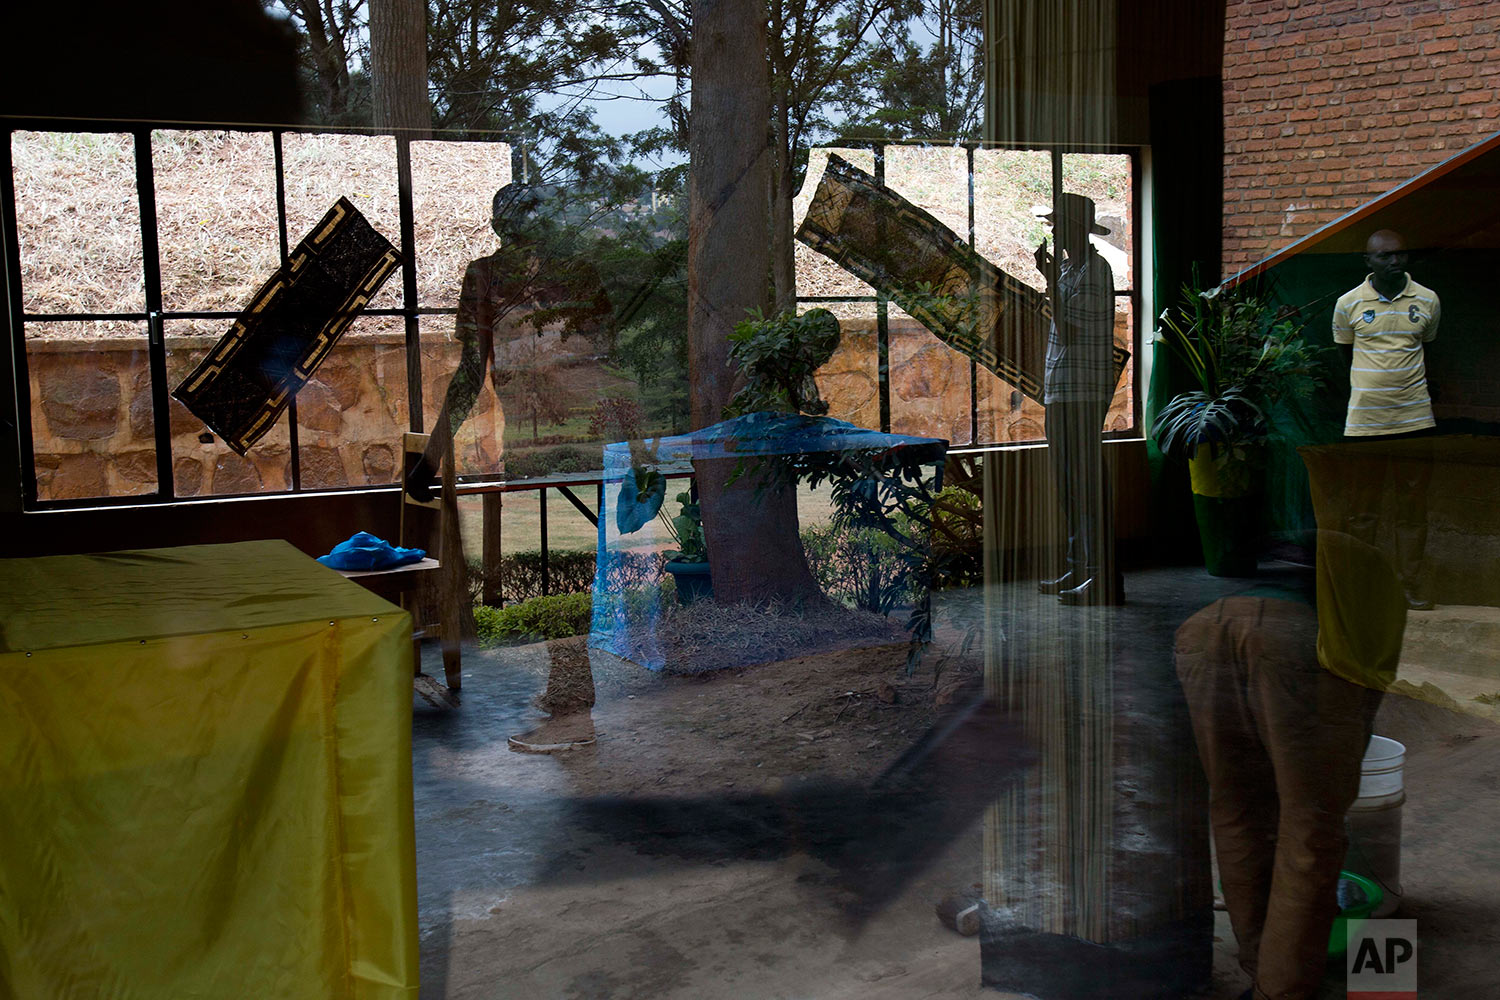  Election volunteers decorate a polling station in Rwanda's capital Kigali, Thursday Aug. 3, 2017, in preparation for the presidential election on Friday in which outgoing president Paul Kagame is widely expected to win another term after the governm